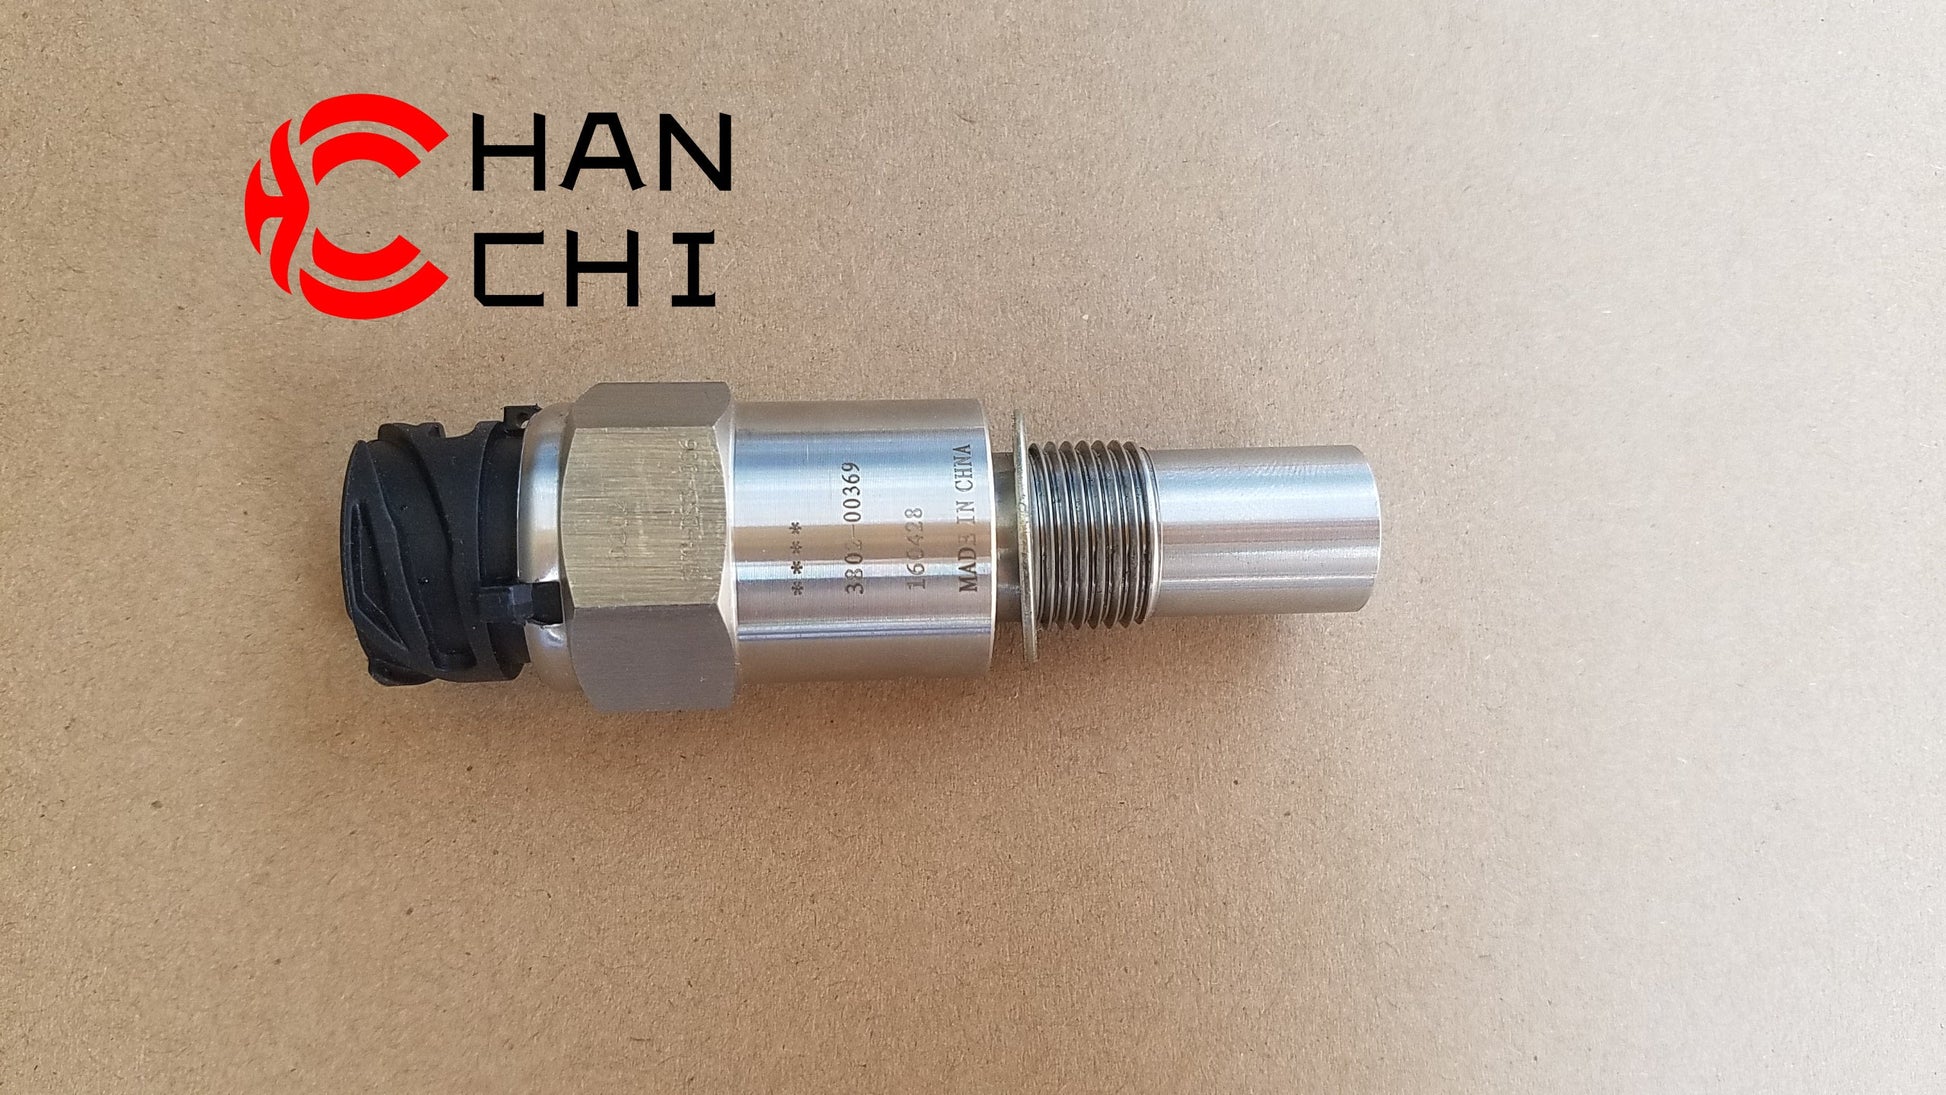 【Description】---☀Welcome to HANCHI☀---✔Good Quality✔Generally Applicability✔Competitive PriceEnjoy your shopping time↖（^ω^）↗【Features】Brand-New with High Quality for the Aftermarket.Totally mathced your need.**Stable Quality**High Precision**Easy Installation**【Specification】OEM: 3802-00369 3623-00165 SNG-DSS-006 Speed Meter SensorMaterial: metalColor: GOLDENOrigin: Made in ChinaWeight: 100g【Packing List】1* Speed Sensor 【More Service】 We can provide OEM service We can Be your one-step solution f